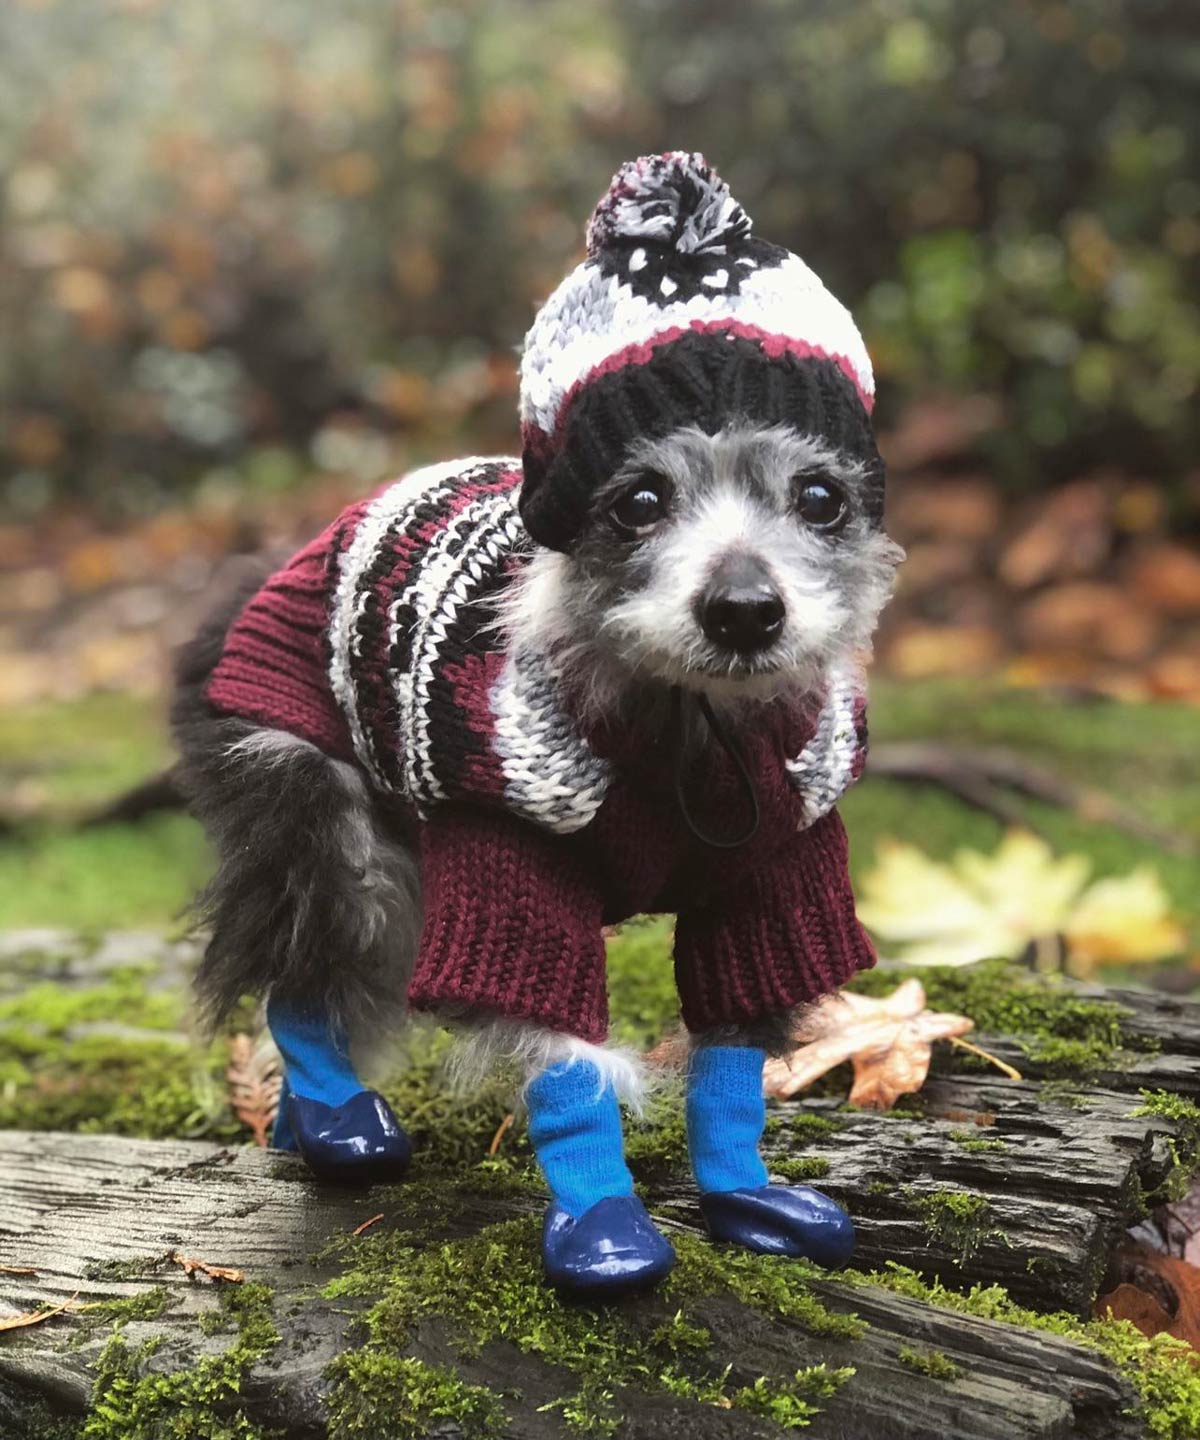 My tiny old dog, in a tiny hat and tiny boots